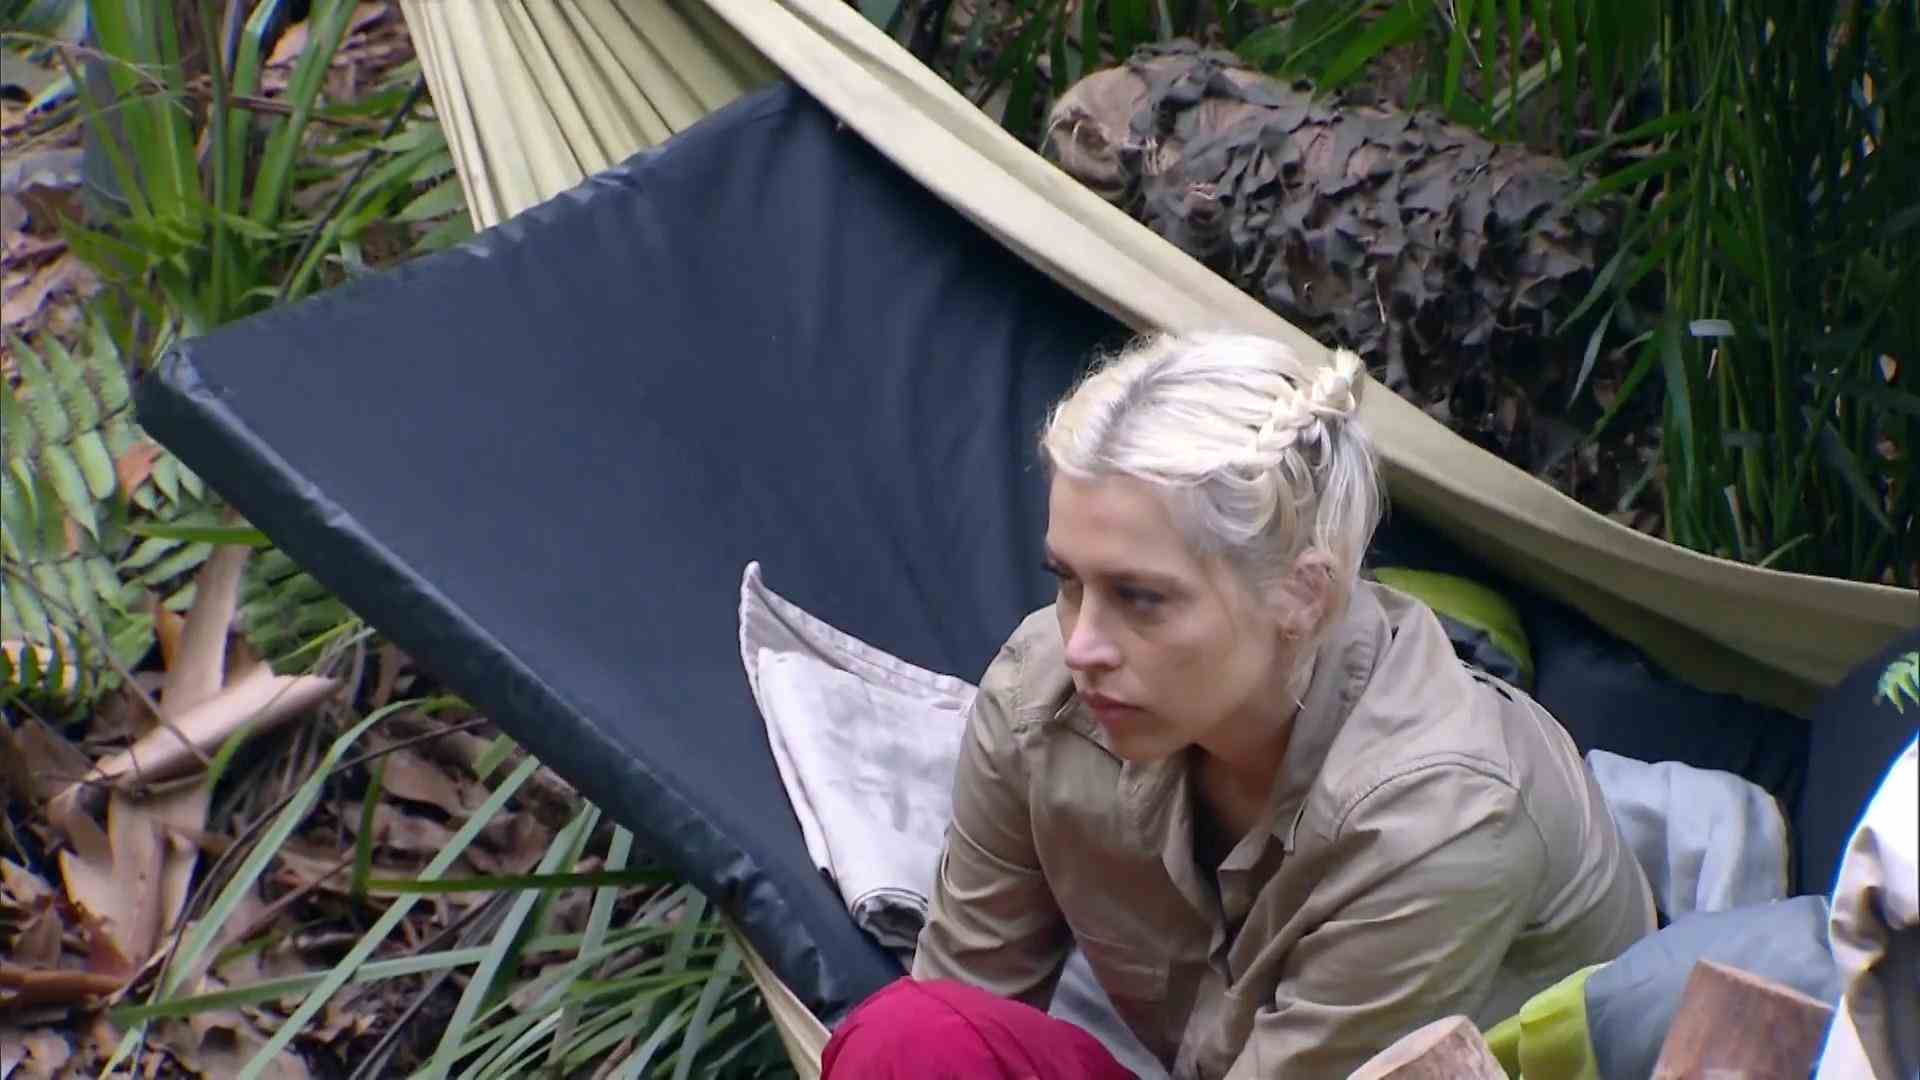 Camping isn't the jungle celebrity thing That's enough!